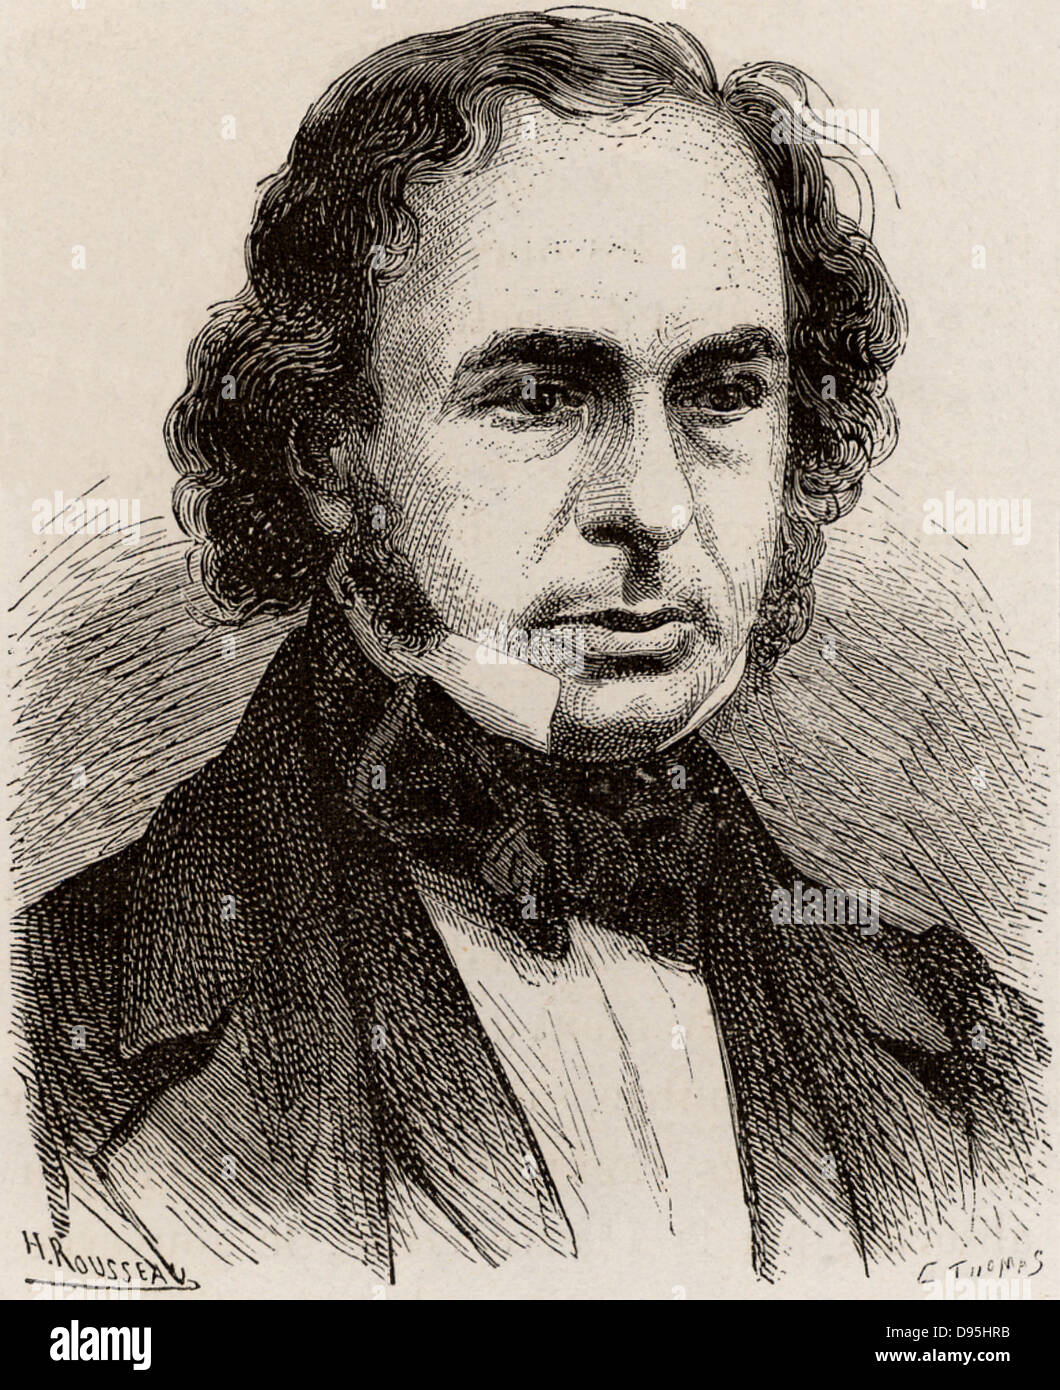 Sambaed Kingdom Brunel (1806-1859) English engineer and inventor, c1870. From 'Les Merveilles de la Science' by Louis Figuier. (London, c1870). Stock Photo